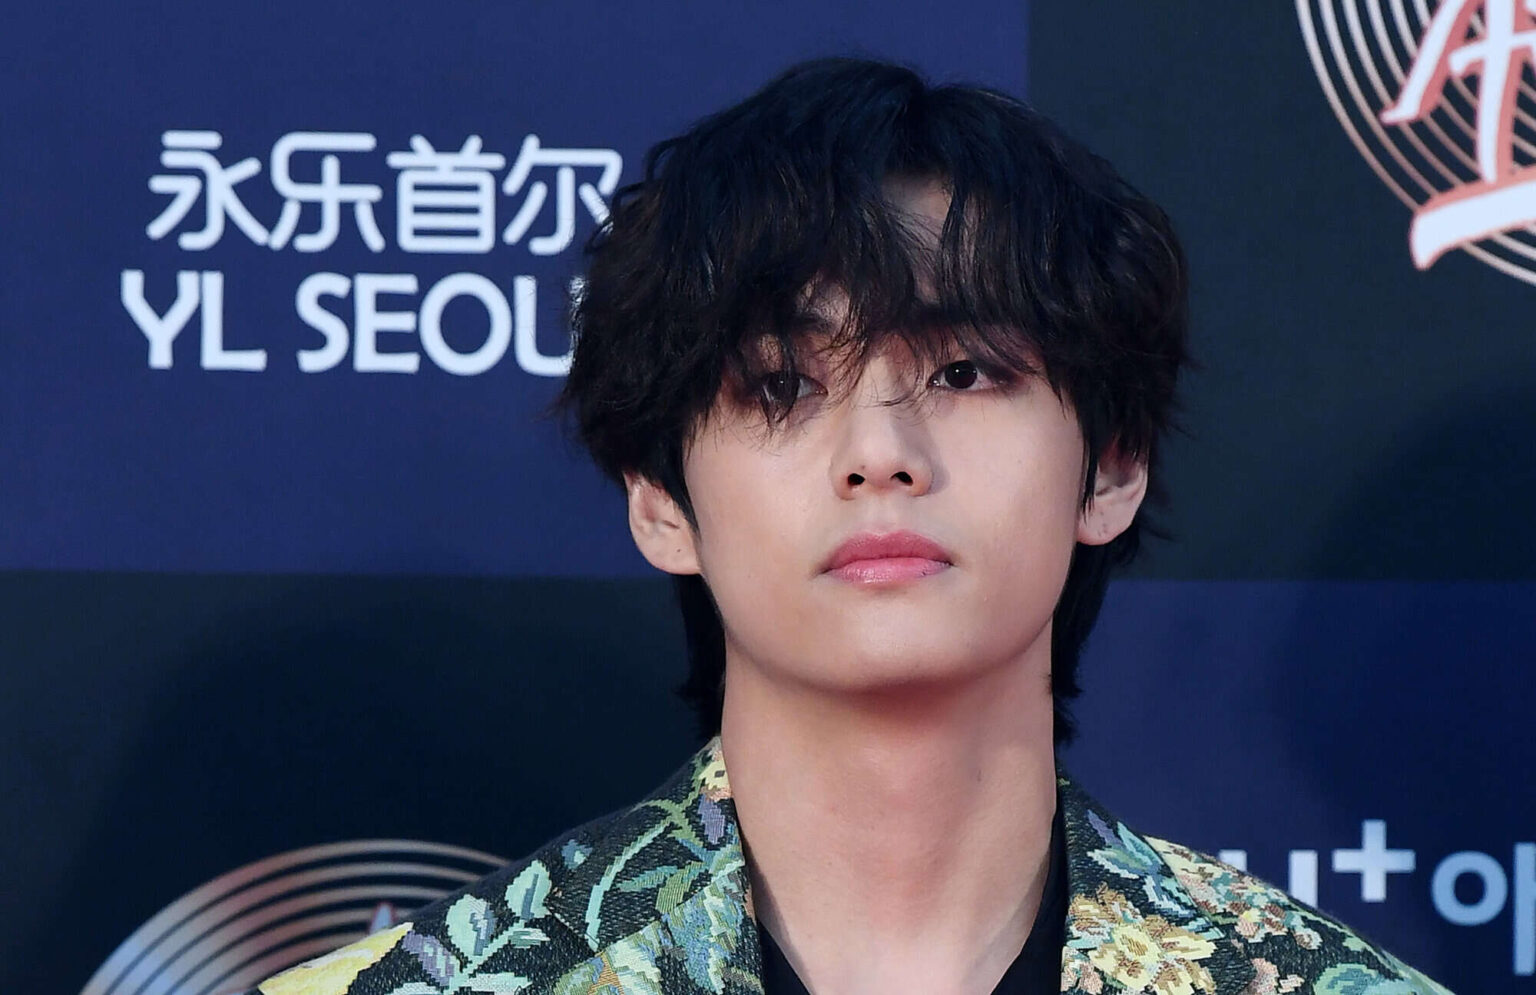 Did V from BTS drive the ARMY crazy with his smile? Discover what happened at the BBMAs and how his performance made fans swoon.